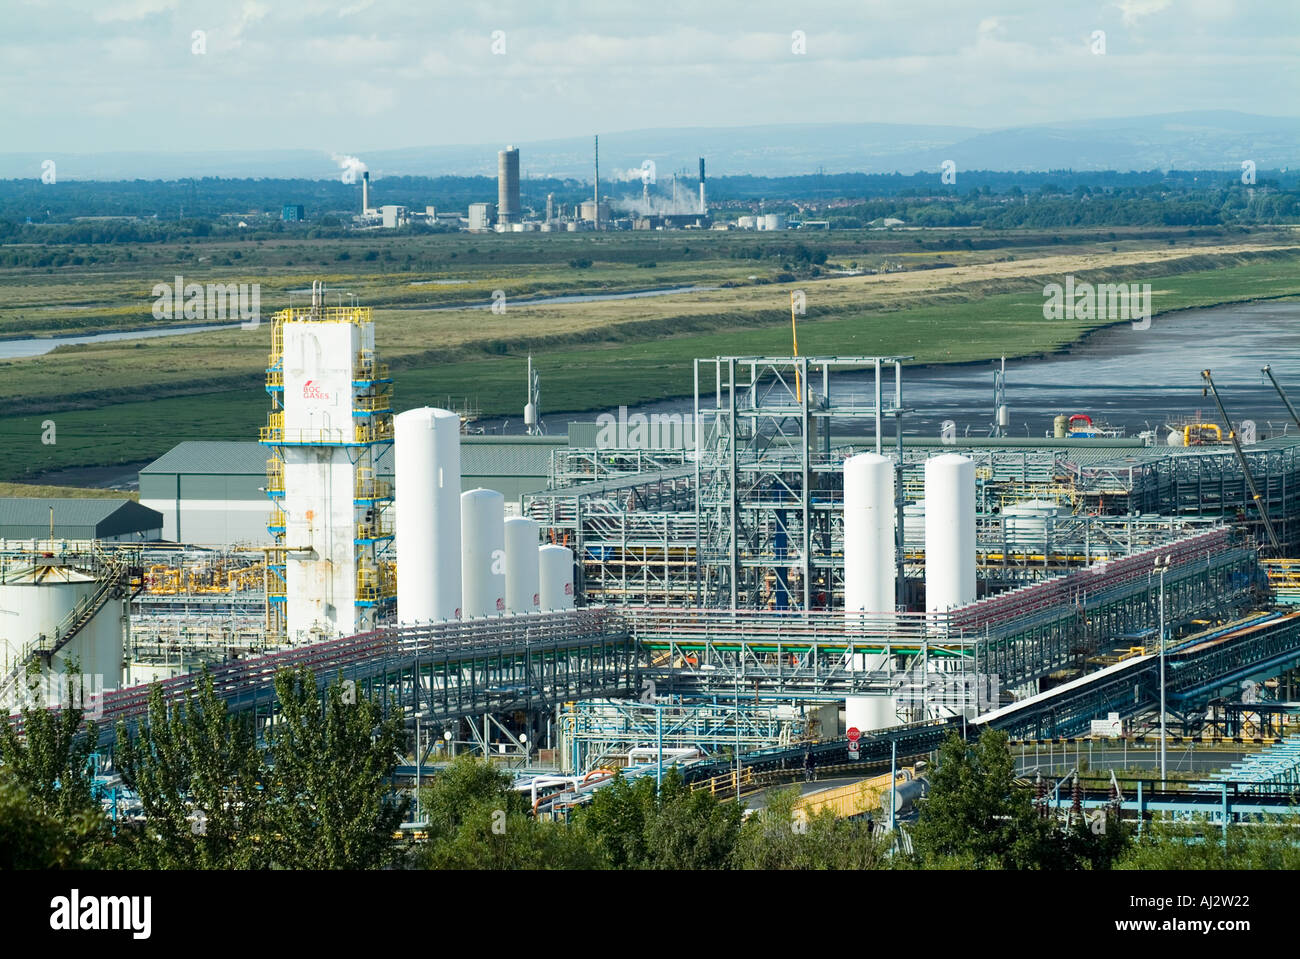 Runcorn Ineos Chlor Chemical complex, formerly ICI Castner Kellner Works, adjacent to main highway in Cheshire. Stock Photo